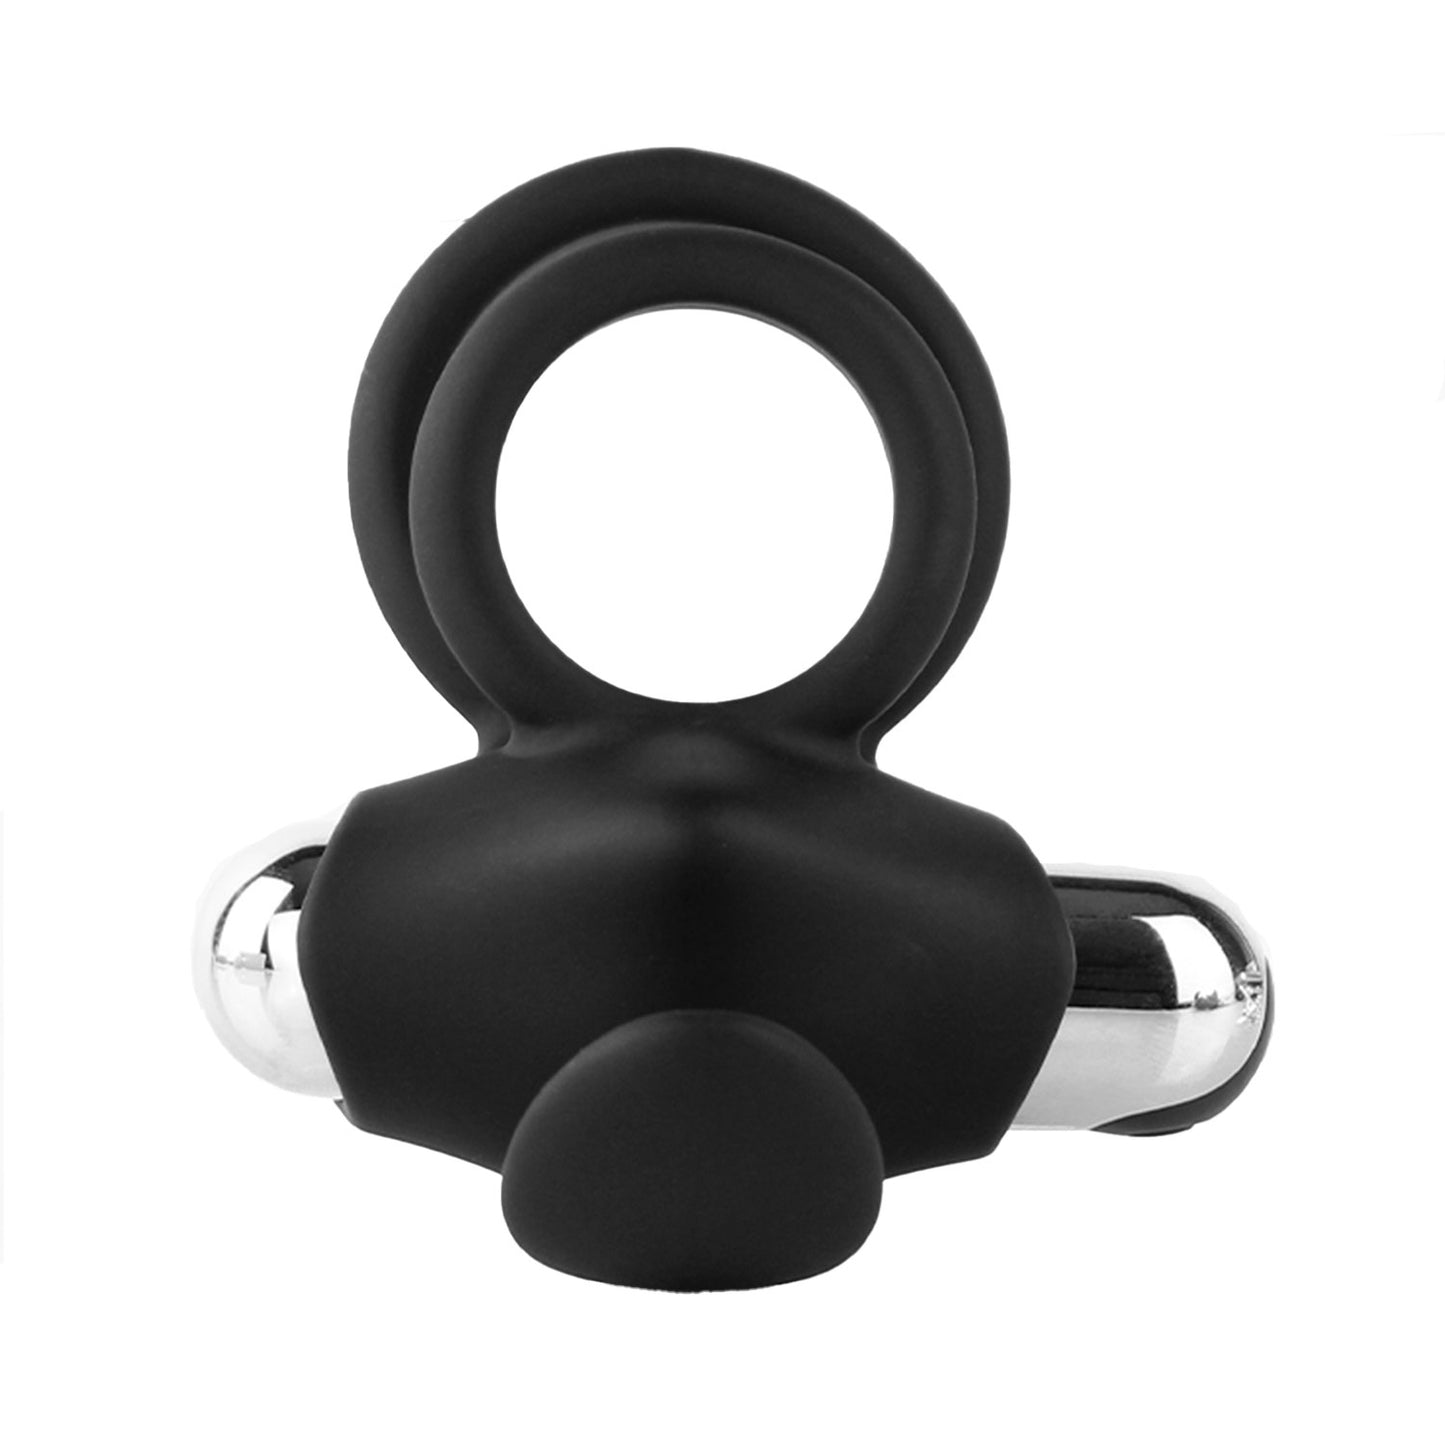 The Horny Company - John O BOOST Rechargeable Vibrating Tongue Dual Cock Ring